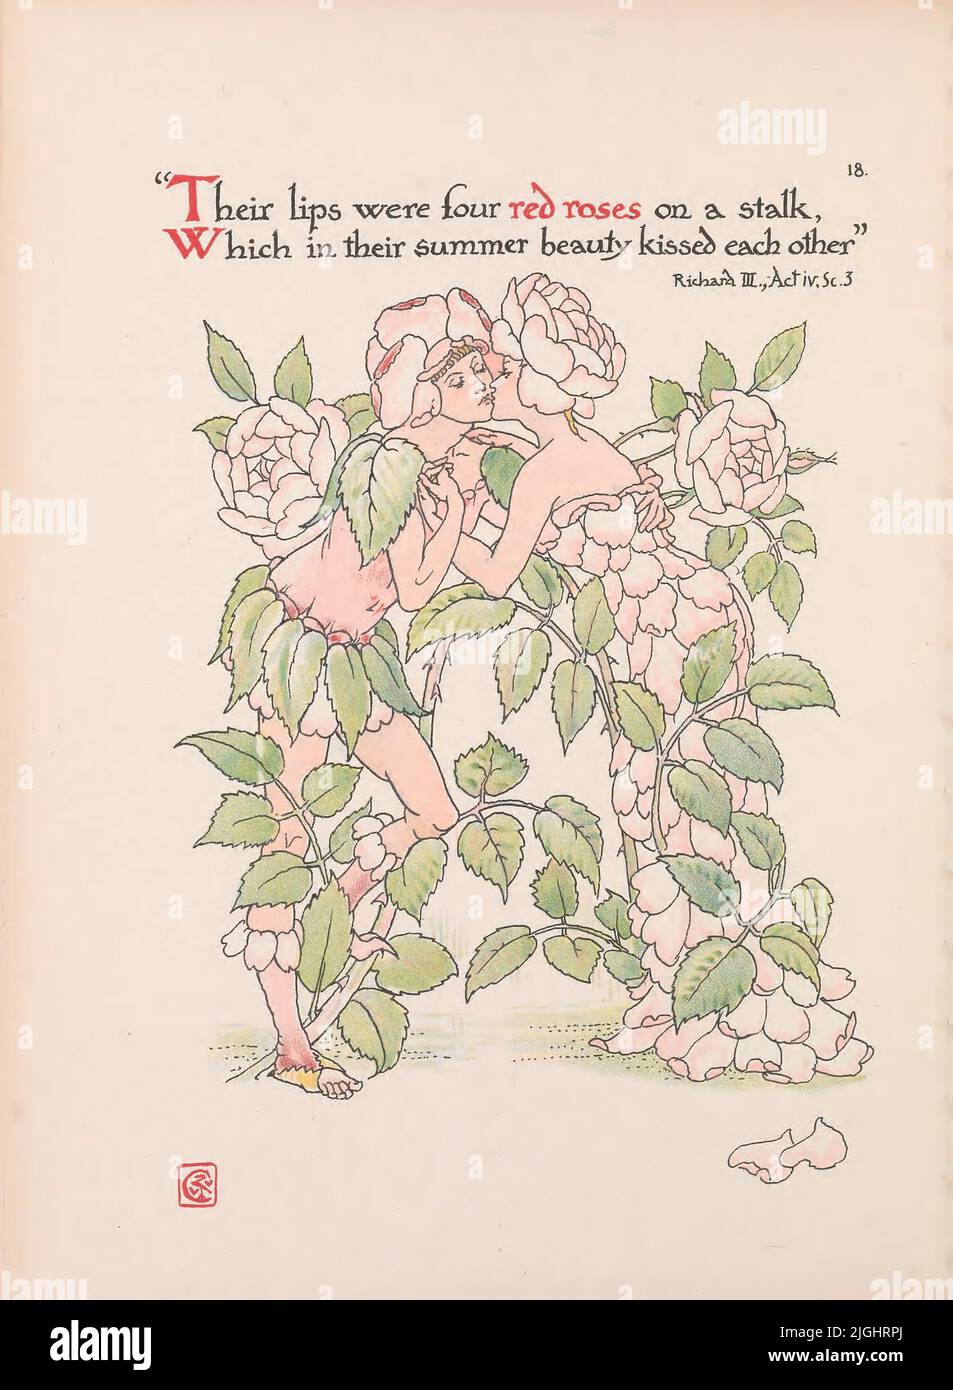 Their Lips were four Red Roses on a stalk, which in their summer beauty kissed each other [ Richard III Act IV scene 3 ] From the book ' Flowers from Shakespeare's garden : a posy from the plays ' Illustrated by Walter Crane, 1845-1915; based on William Shakespeare, 1564-1616 Publication date 1909 Publisher [London] : Cassell & Co., Ltd. Stock Photo